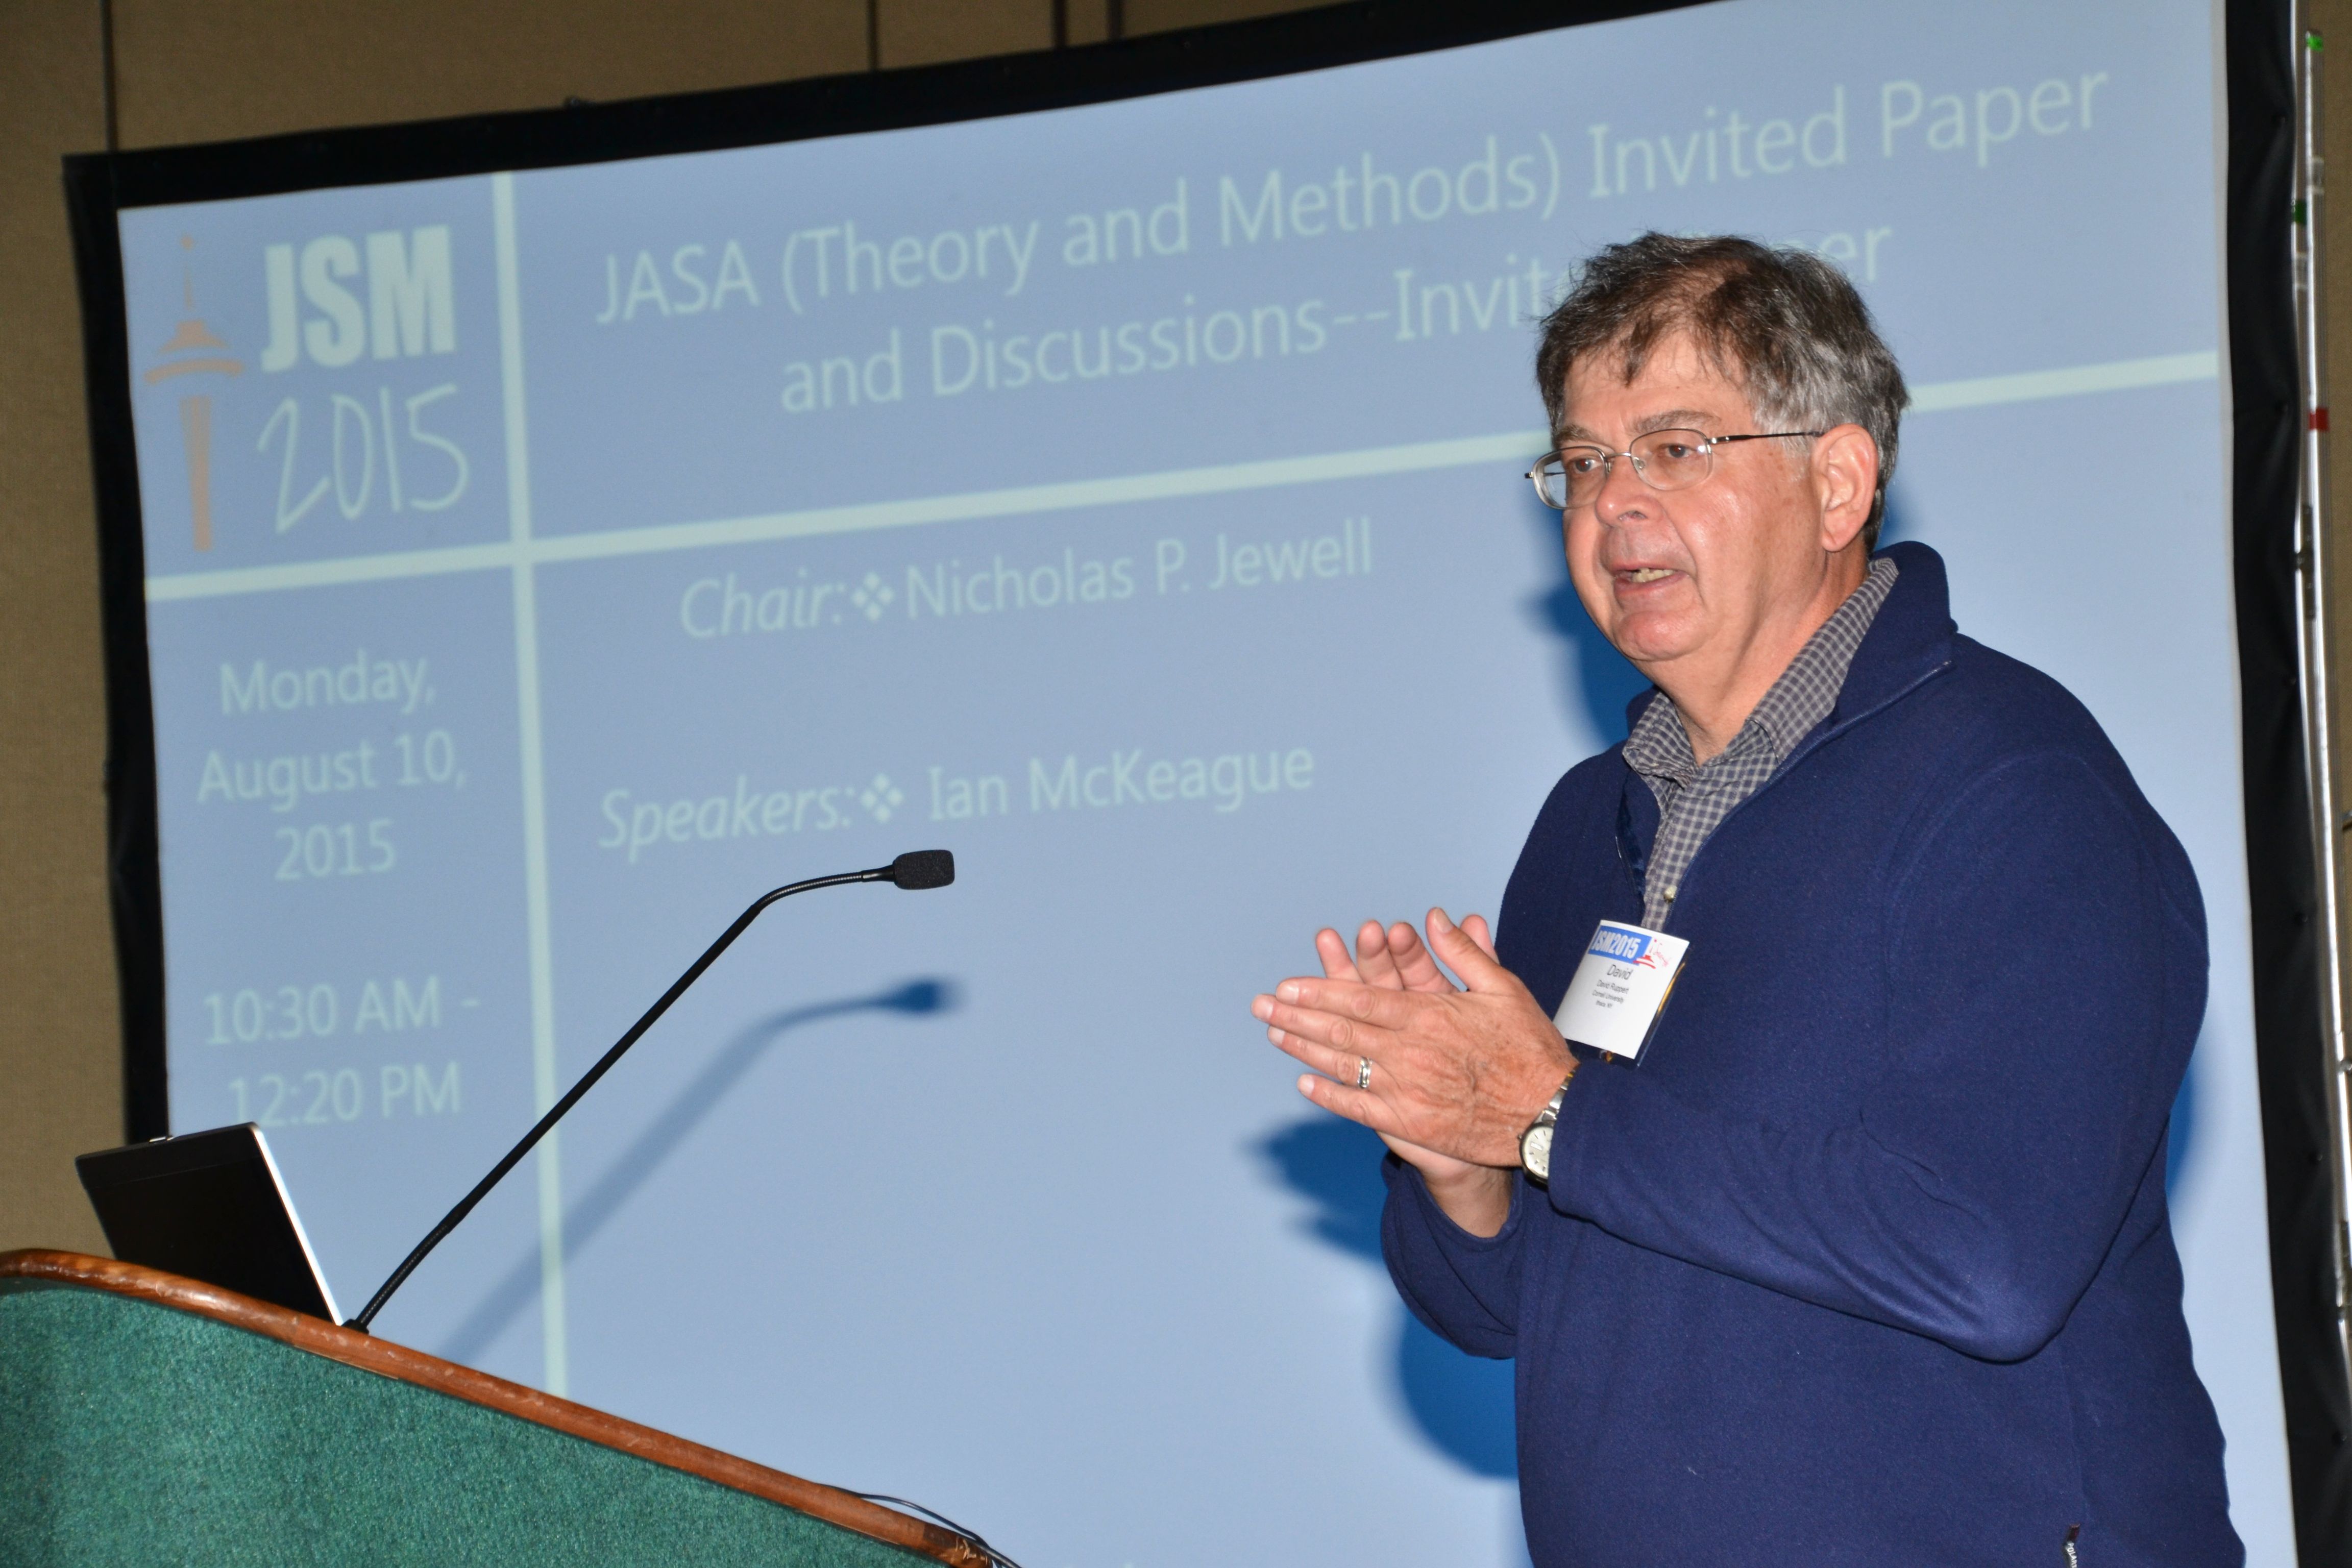 David Ruppert, JASA editor and session organizer, speaks during the JASA (Theory and Methods) invited paper and discussions session. 